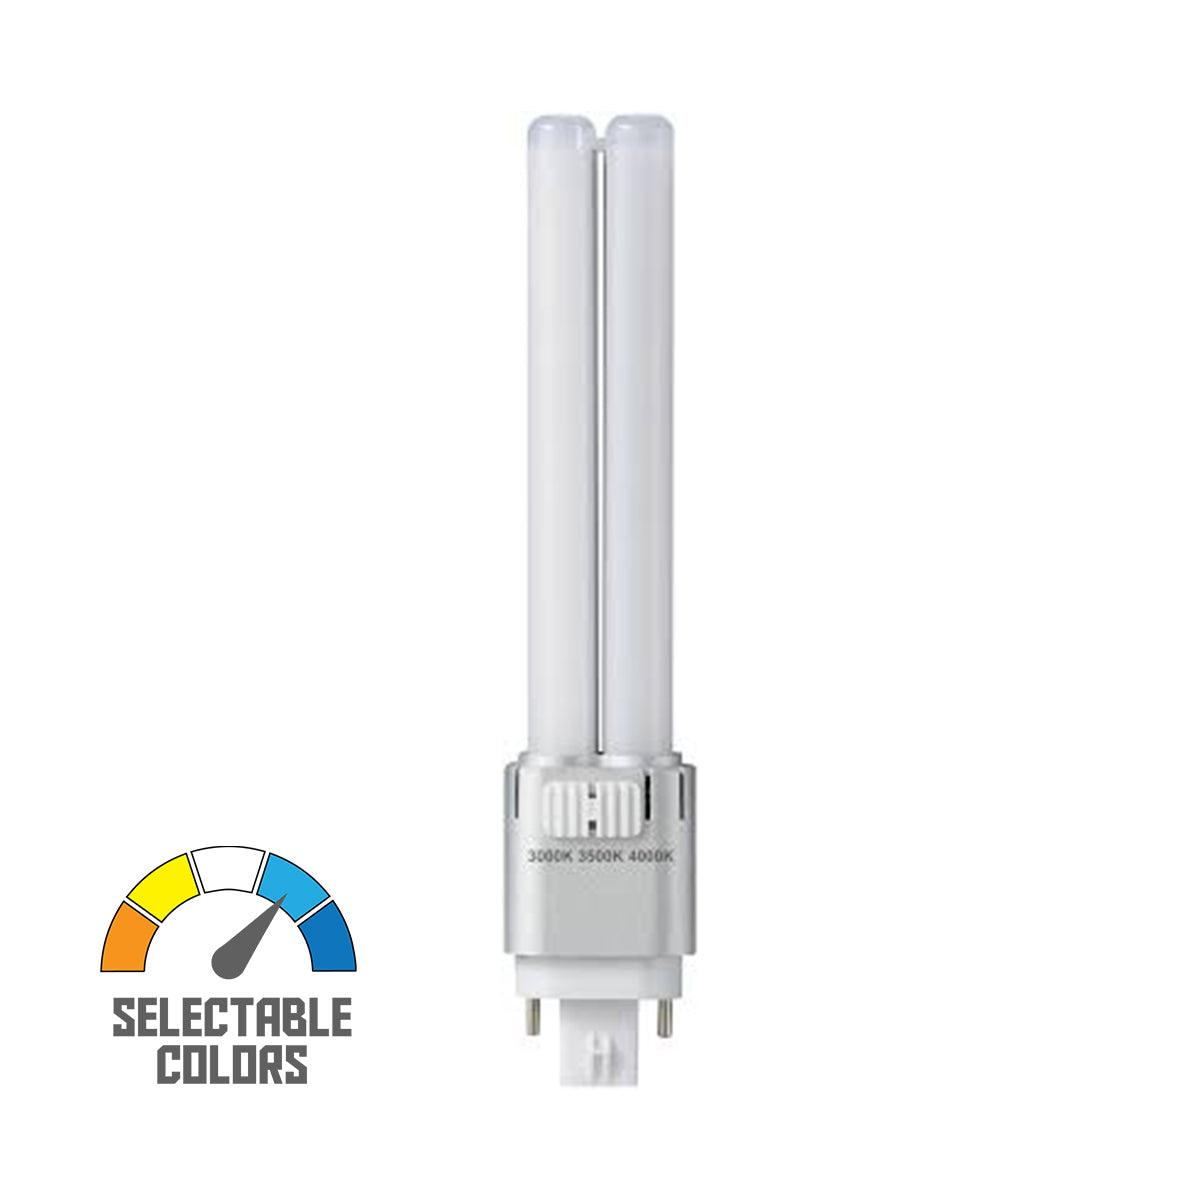 4 Pin PL LED Bulb, 10 Watt, 1400 Lumens, Selectable CCT 30K/35K/40K, Omnidirectional, Replaces 42W CFL, G24q Base, Direct Or Bypass - Bees Lighting